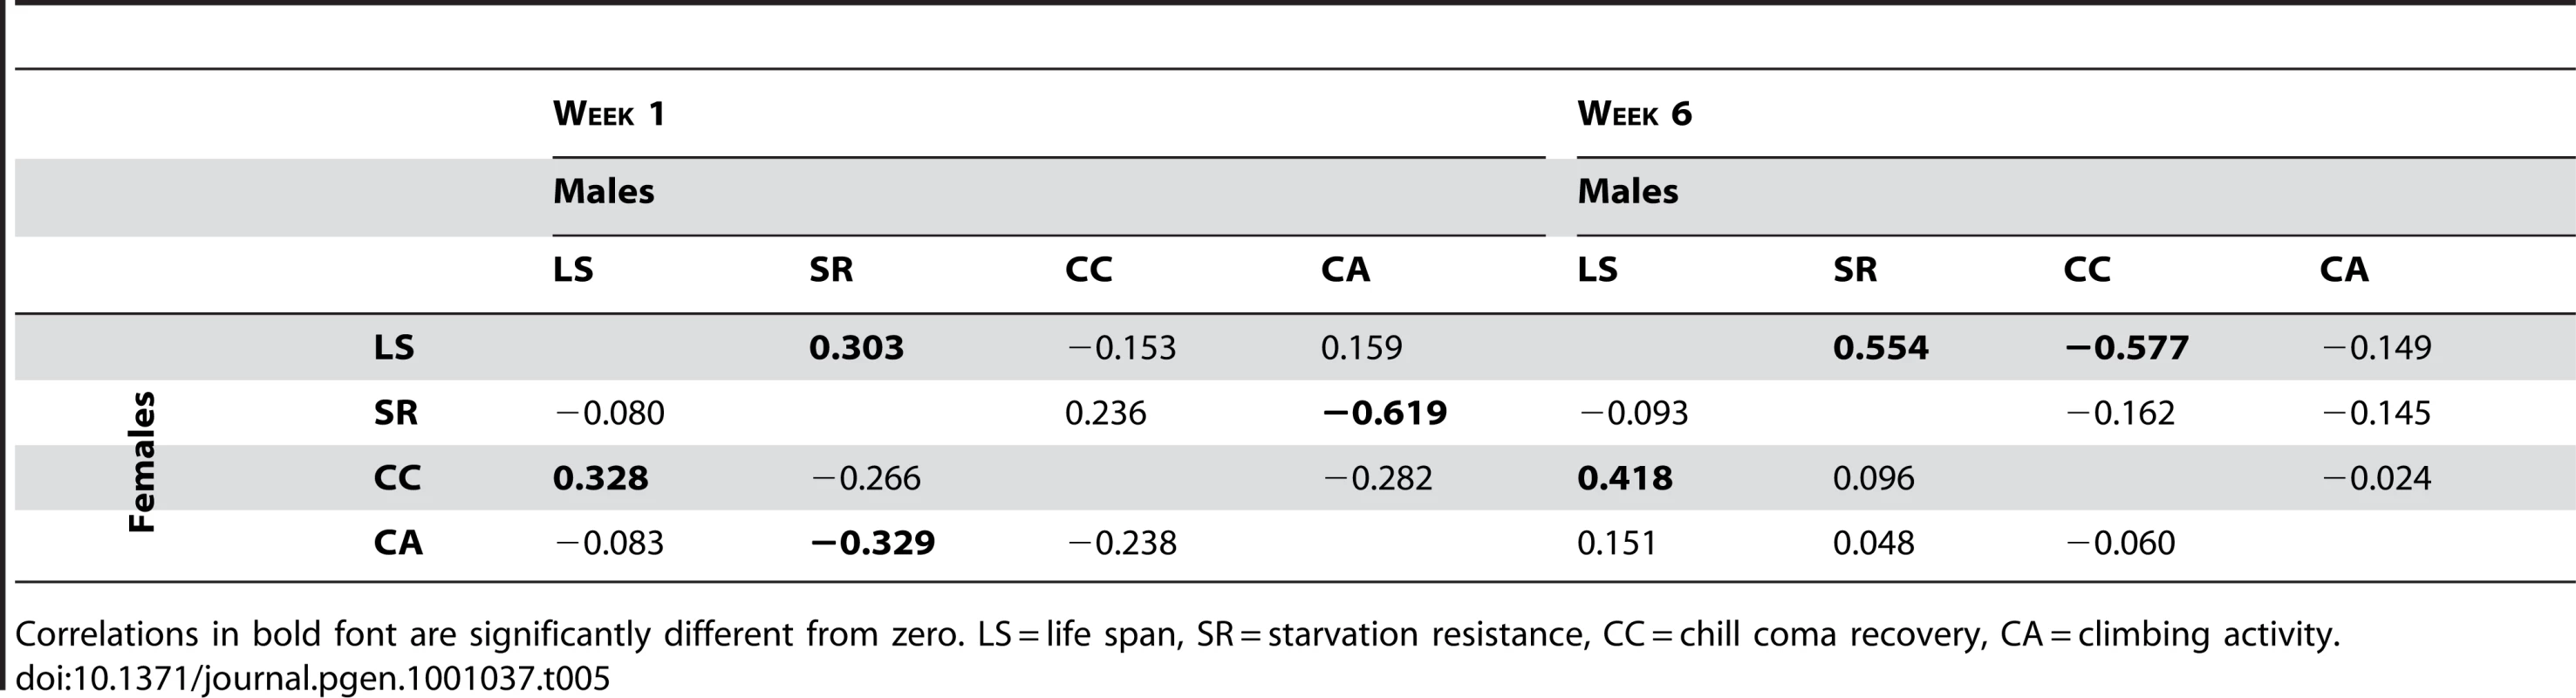 Mutational correlations among life span, starvation resistance, chill coma recovery, and climbing ability.